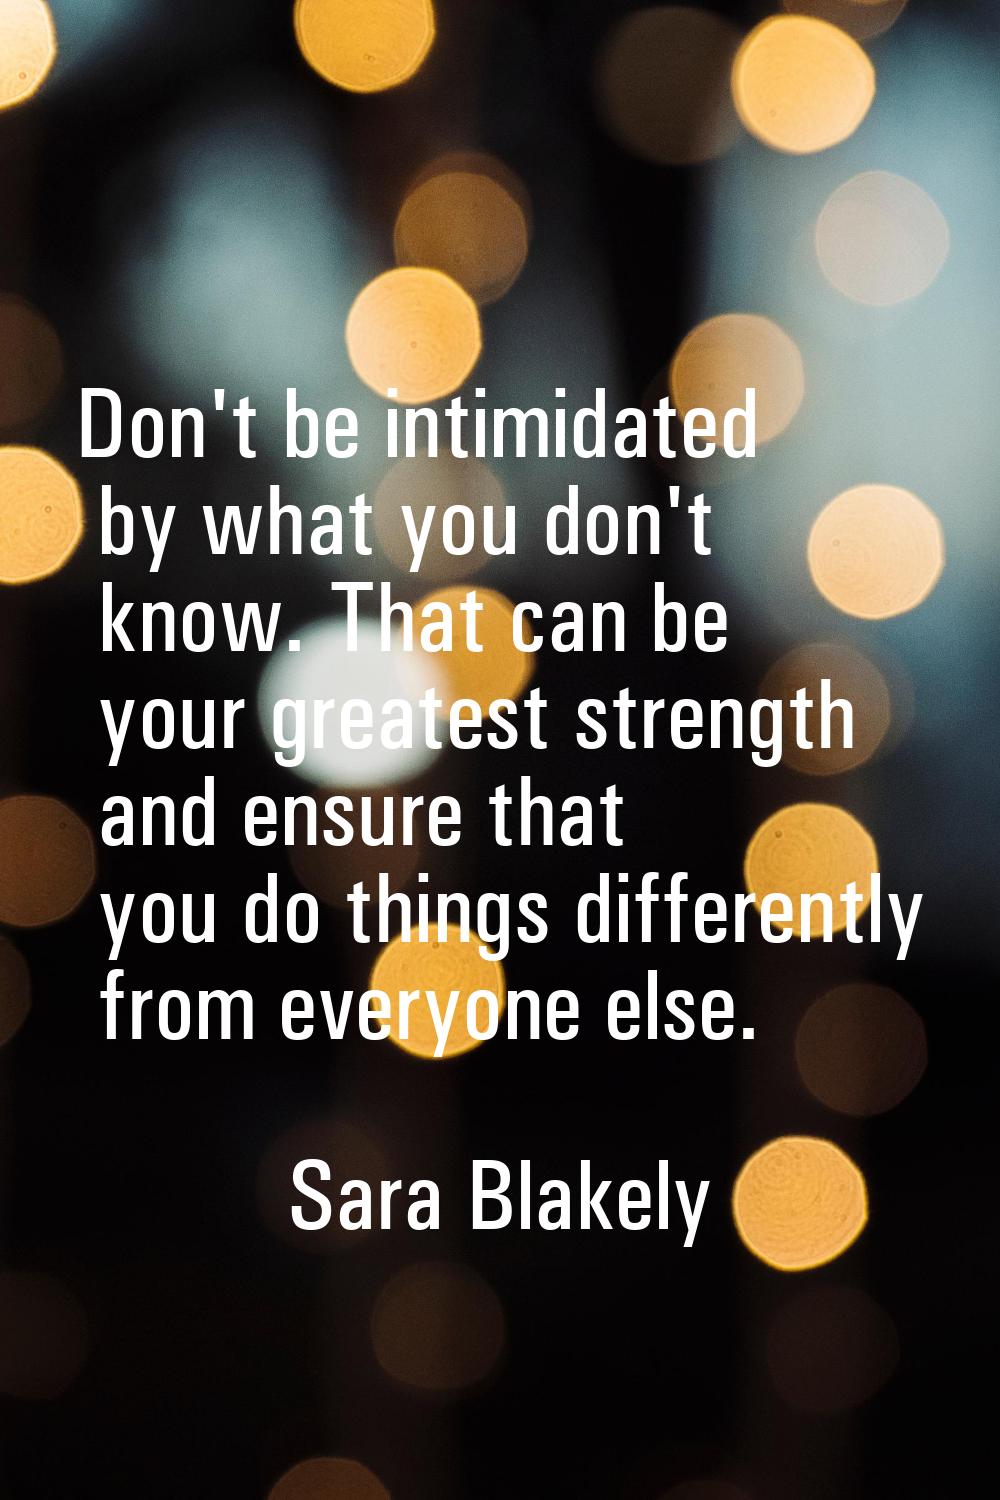 Don't be intimidated by what you don't know. That can be your greatest strength and ensure that you